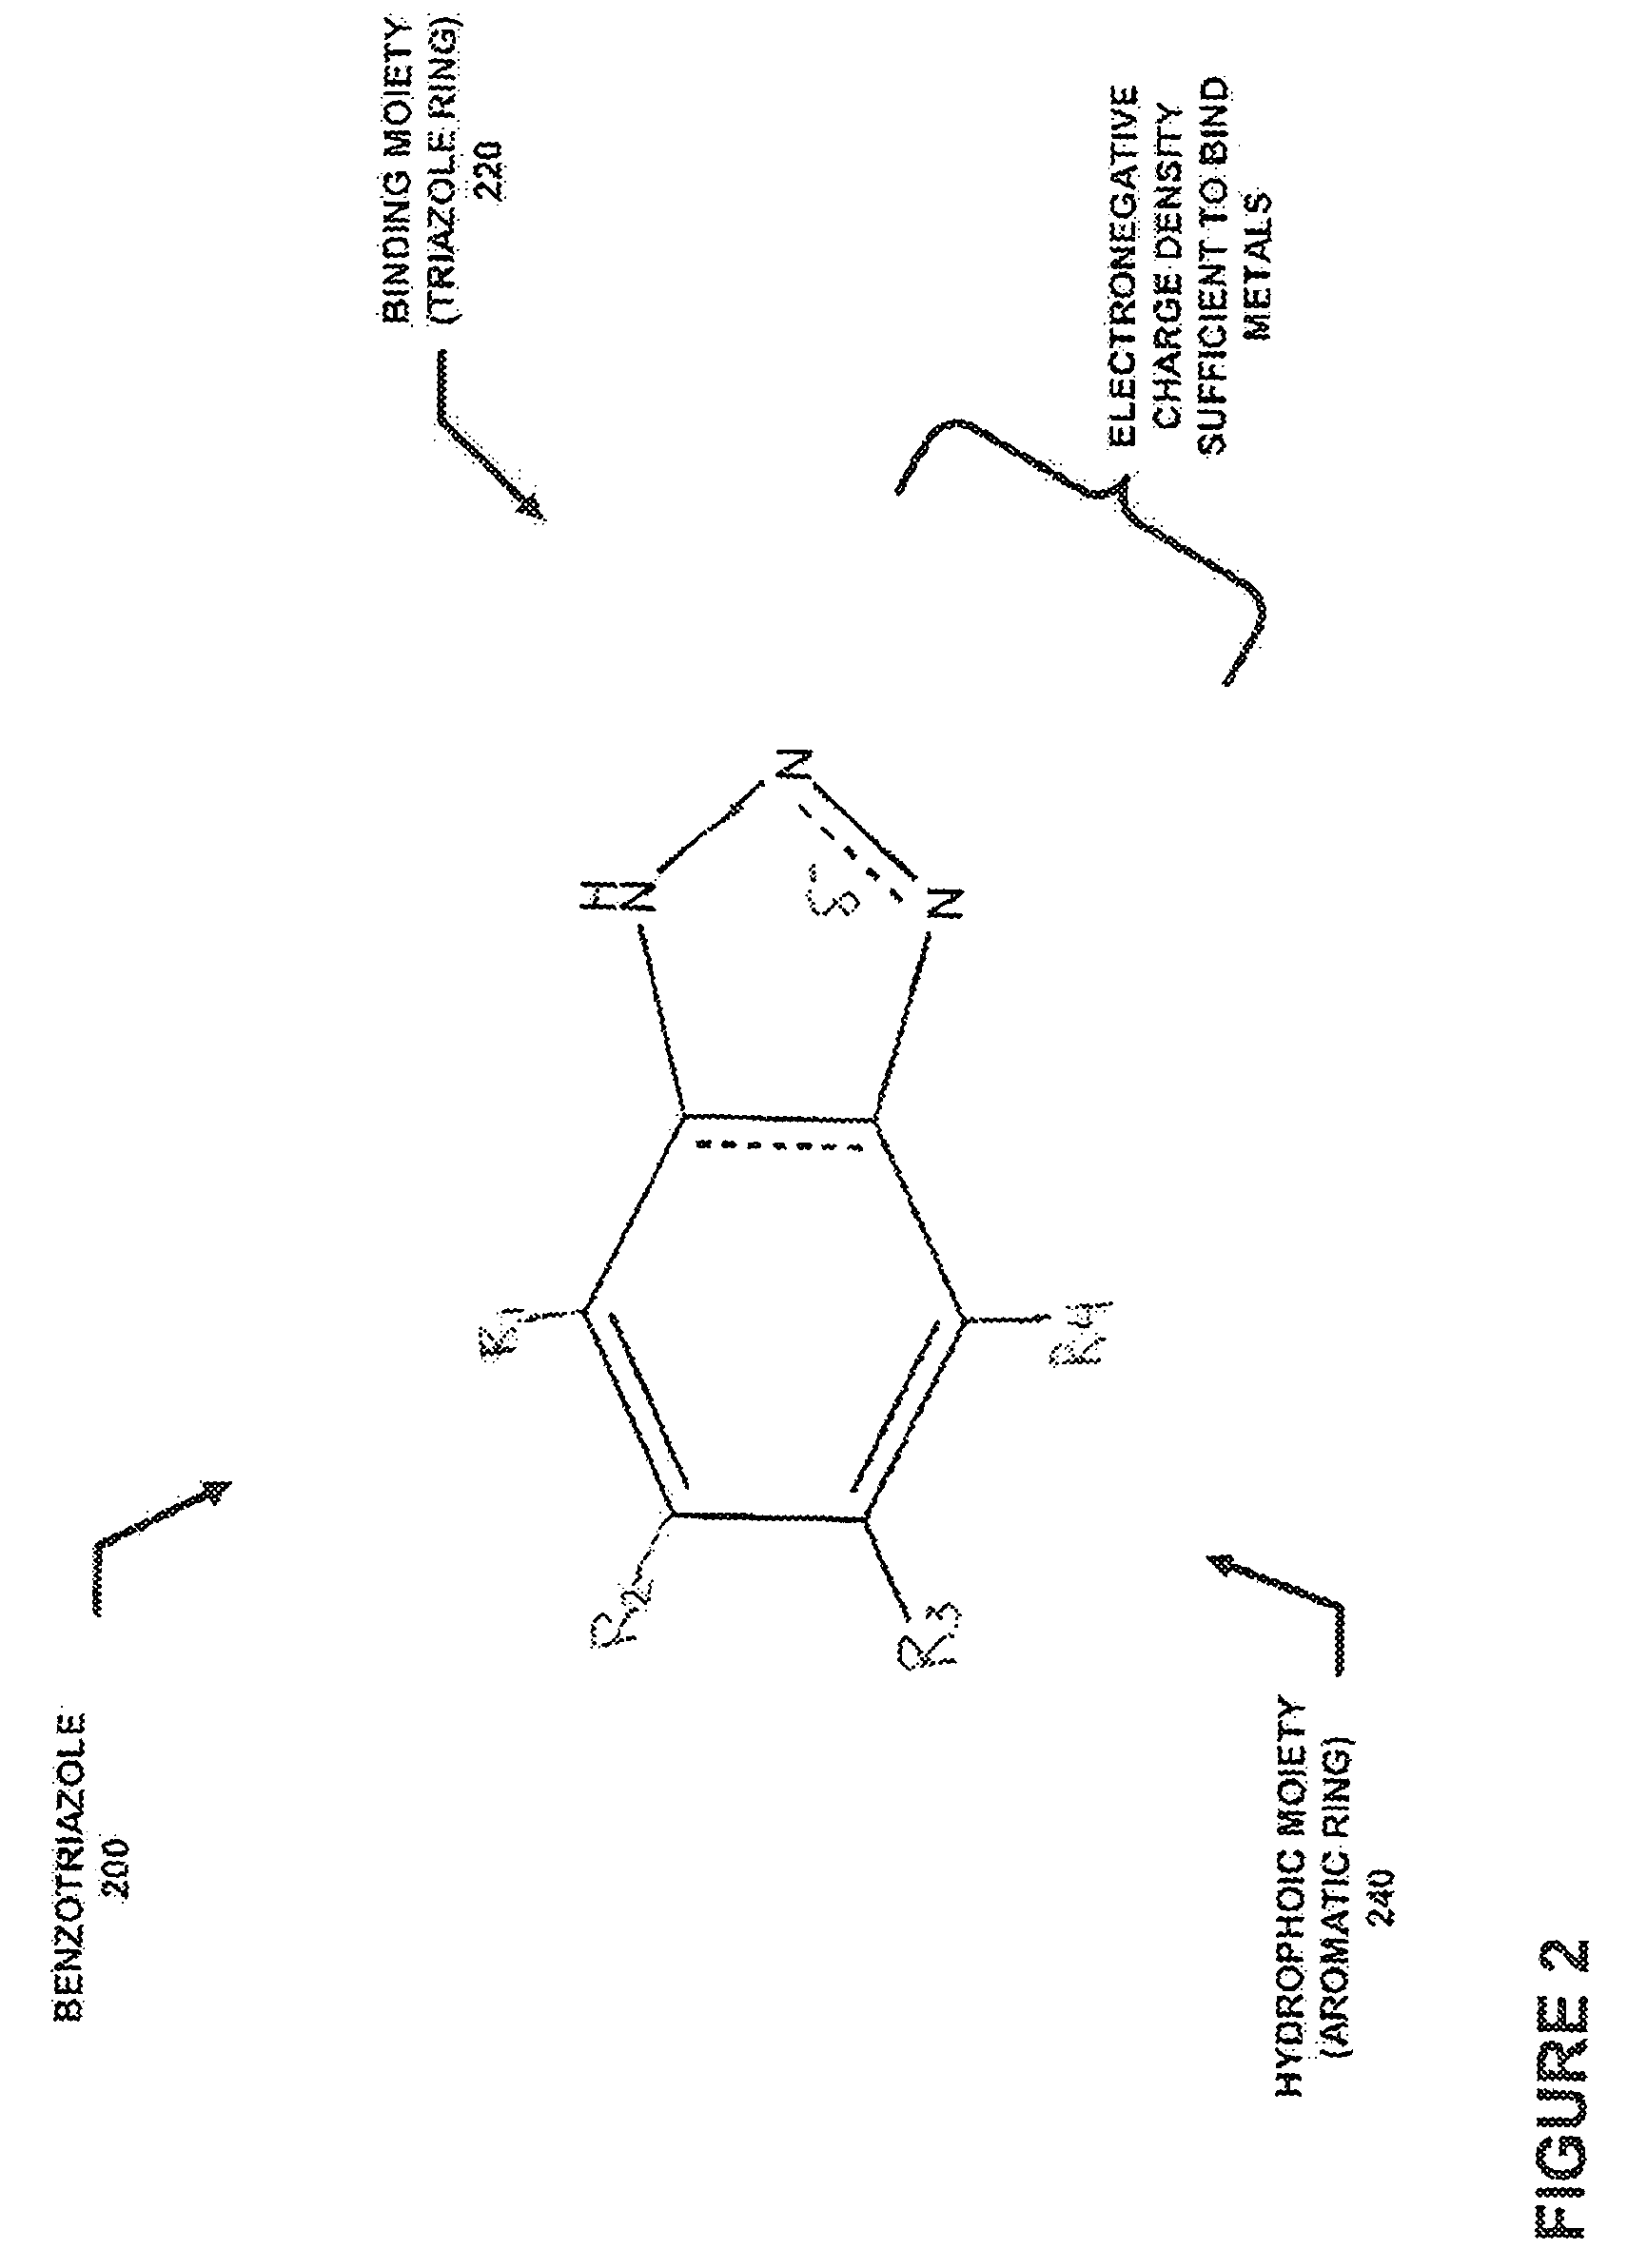 Removing metals from solution using metal binding compounds and sorbents therefor